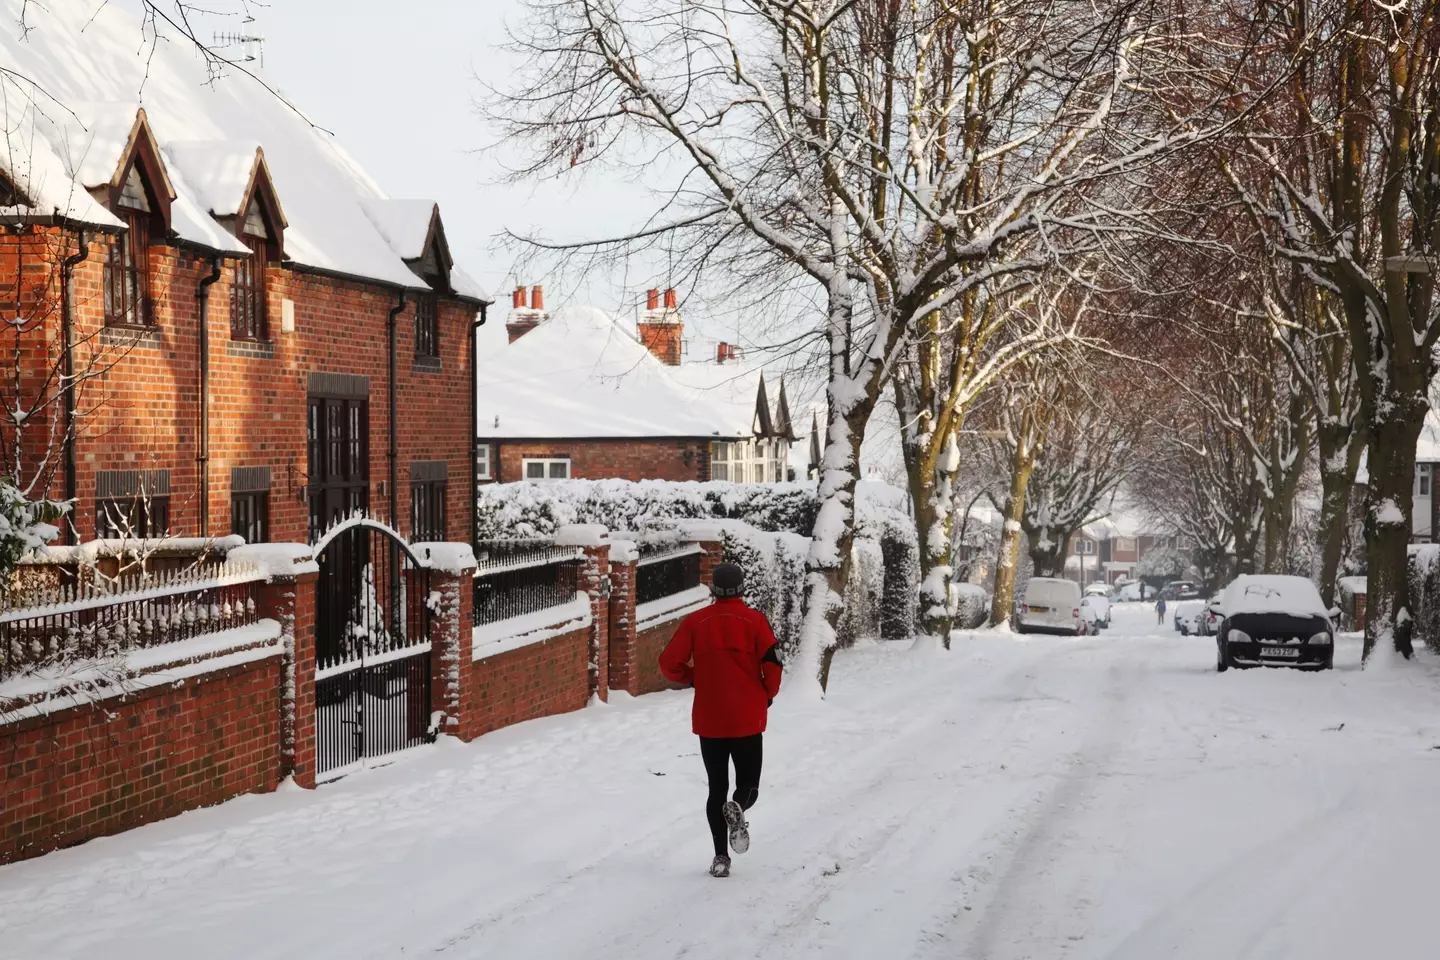 Parts of the UK could see snow next week.